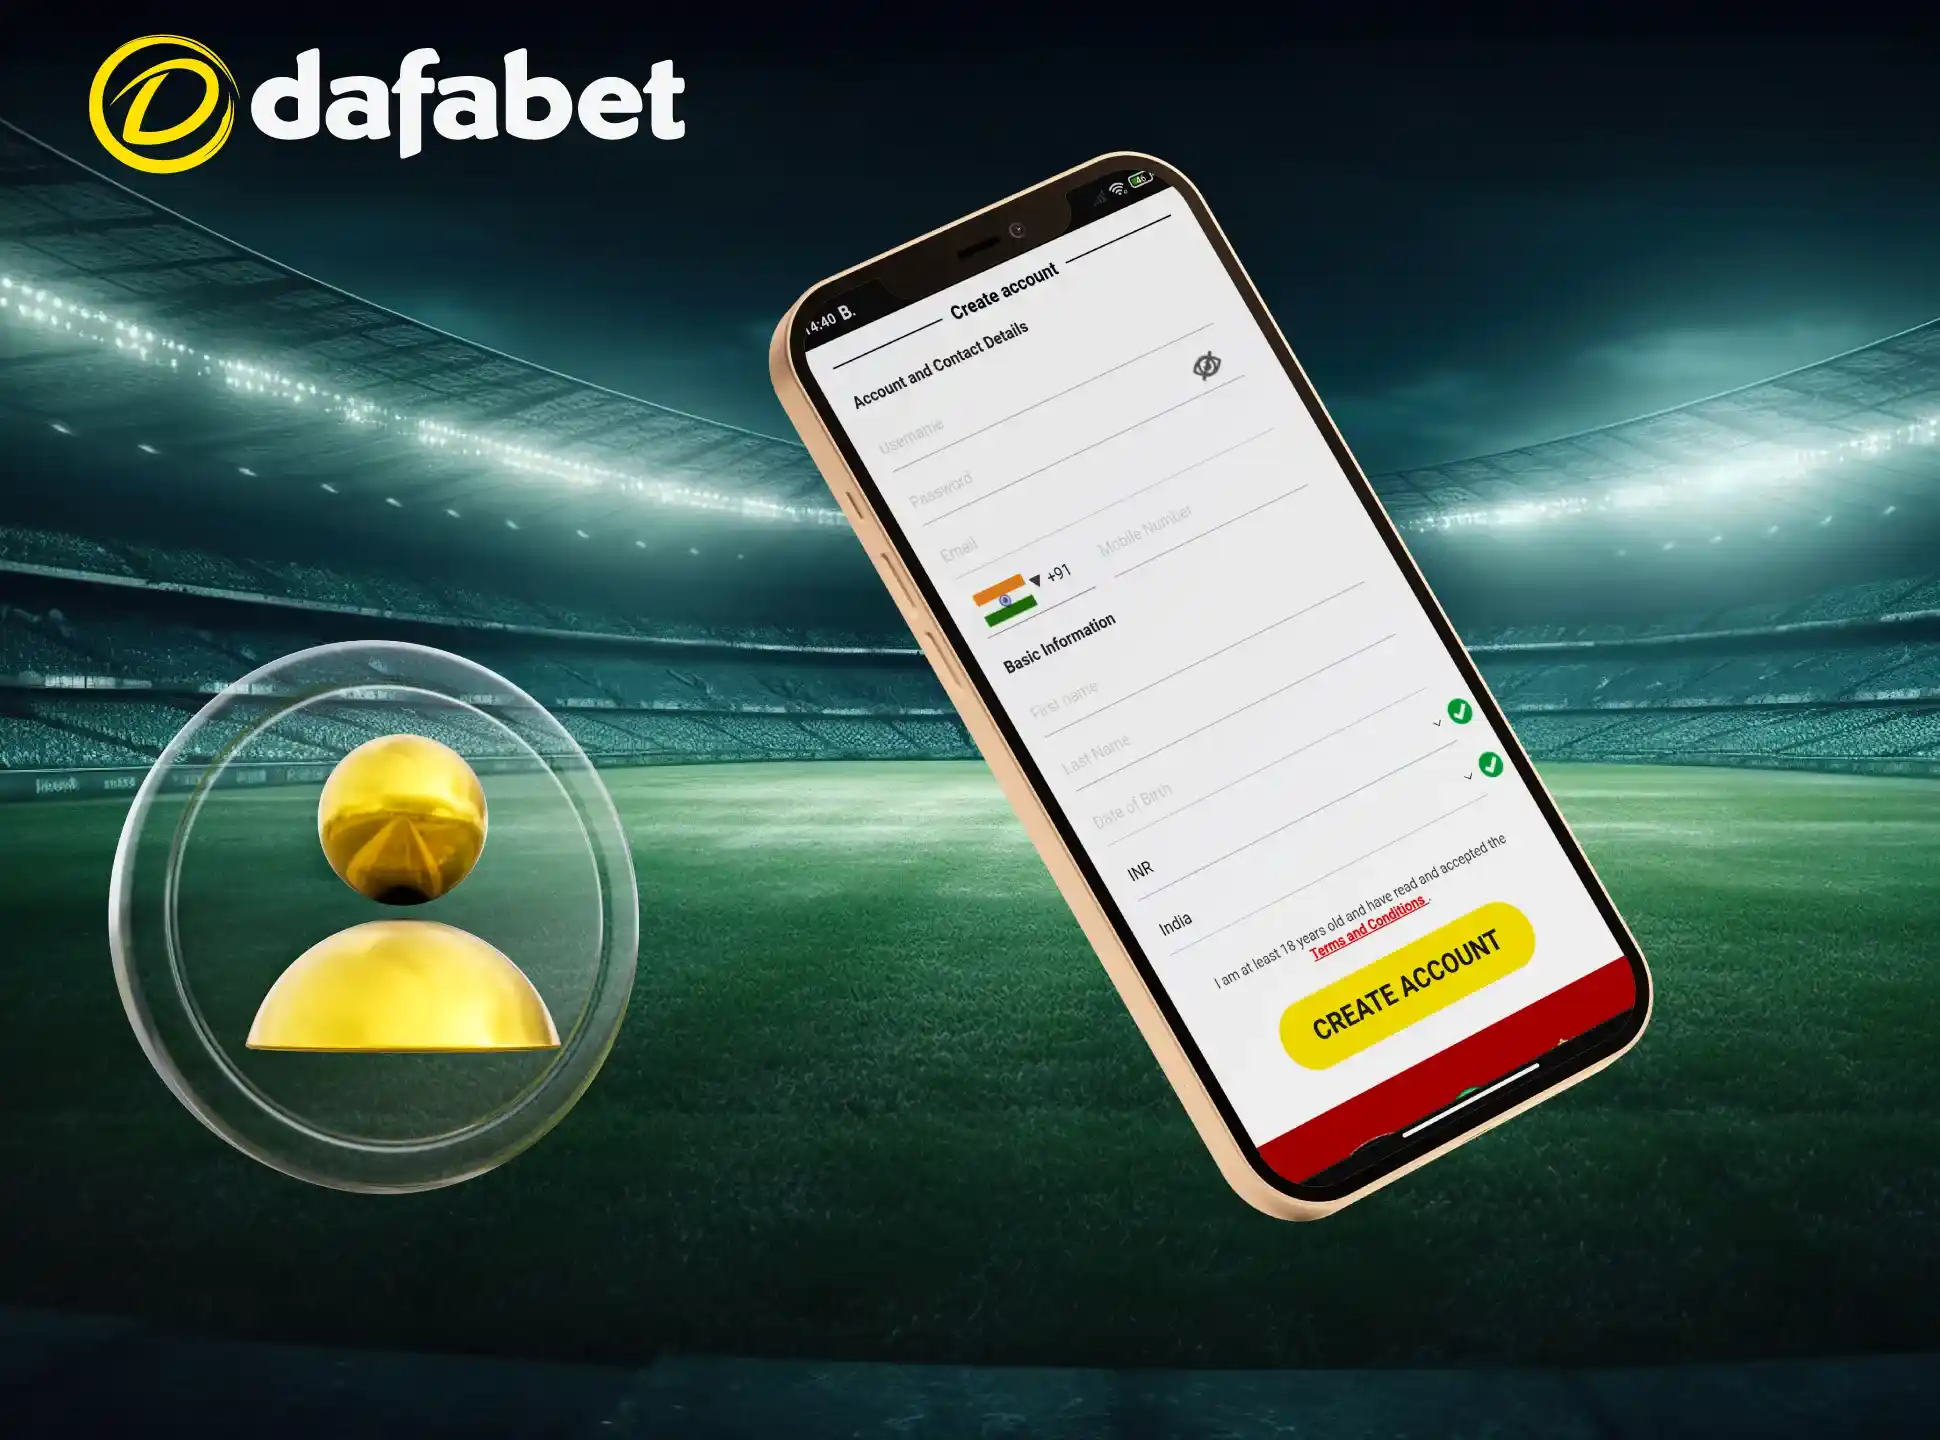 You can sign up on the Dafabet app using your phone number or email address.